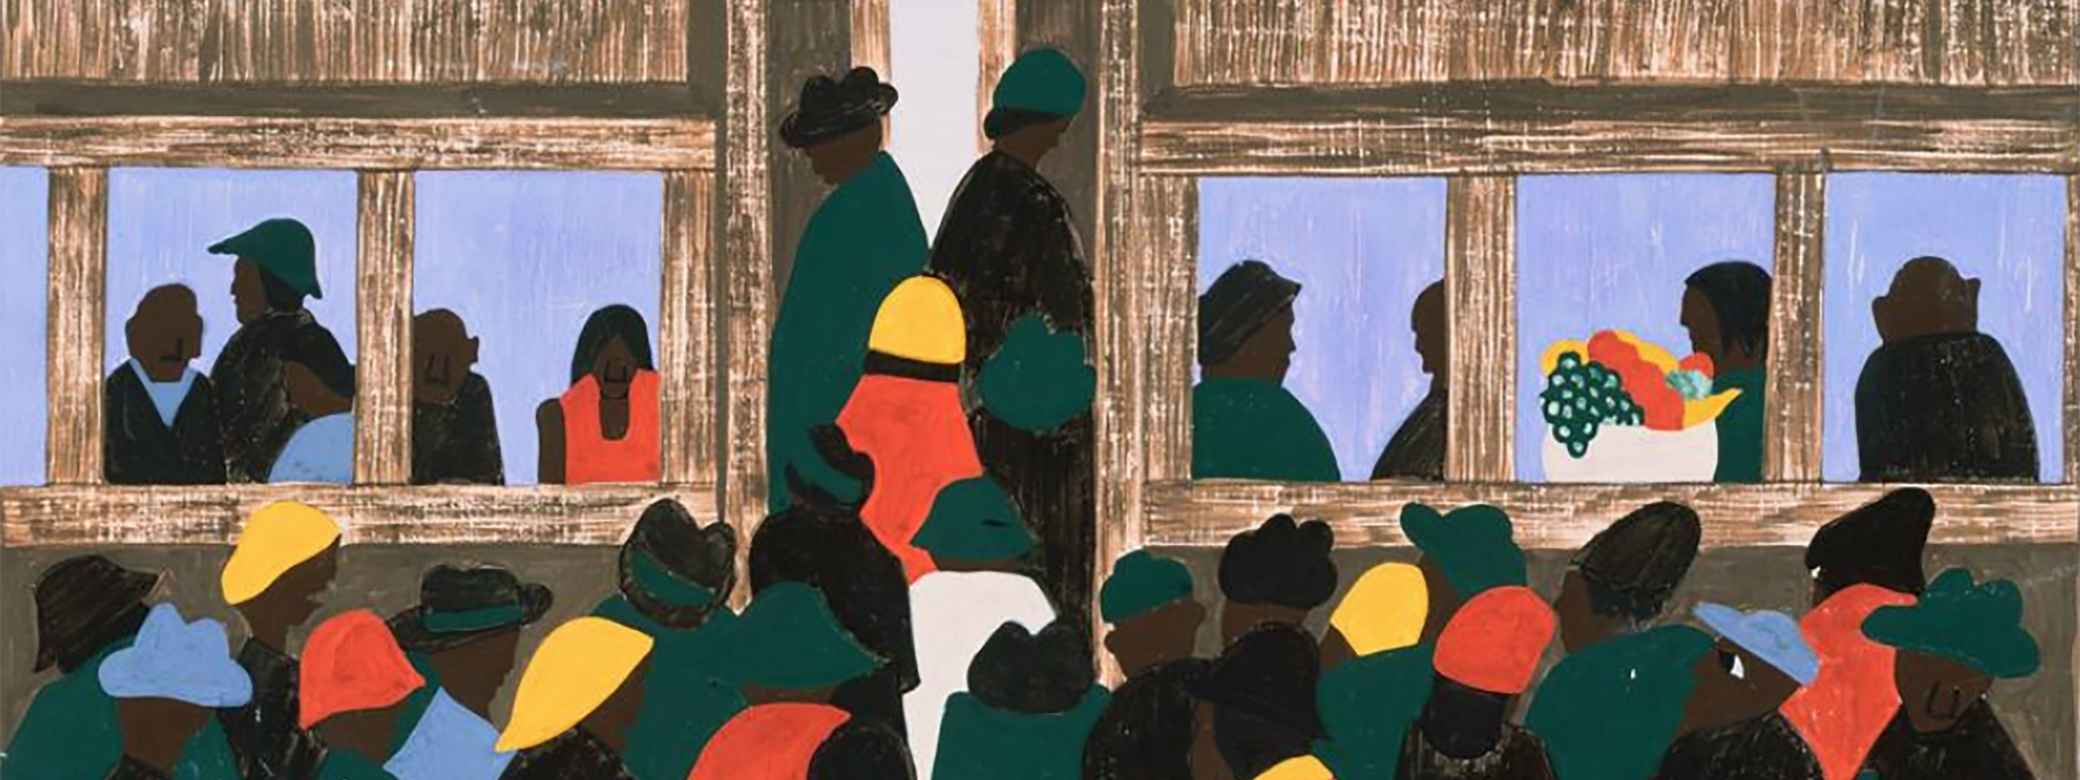 Detail from painting in Jacob Lawrence's Migration Series